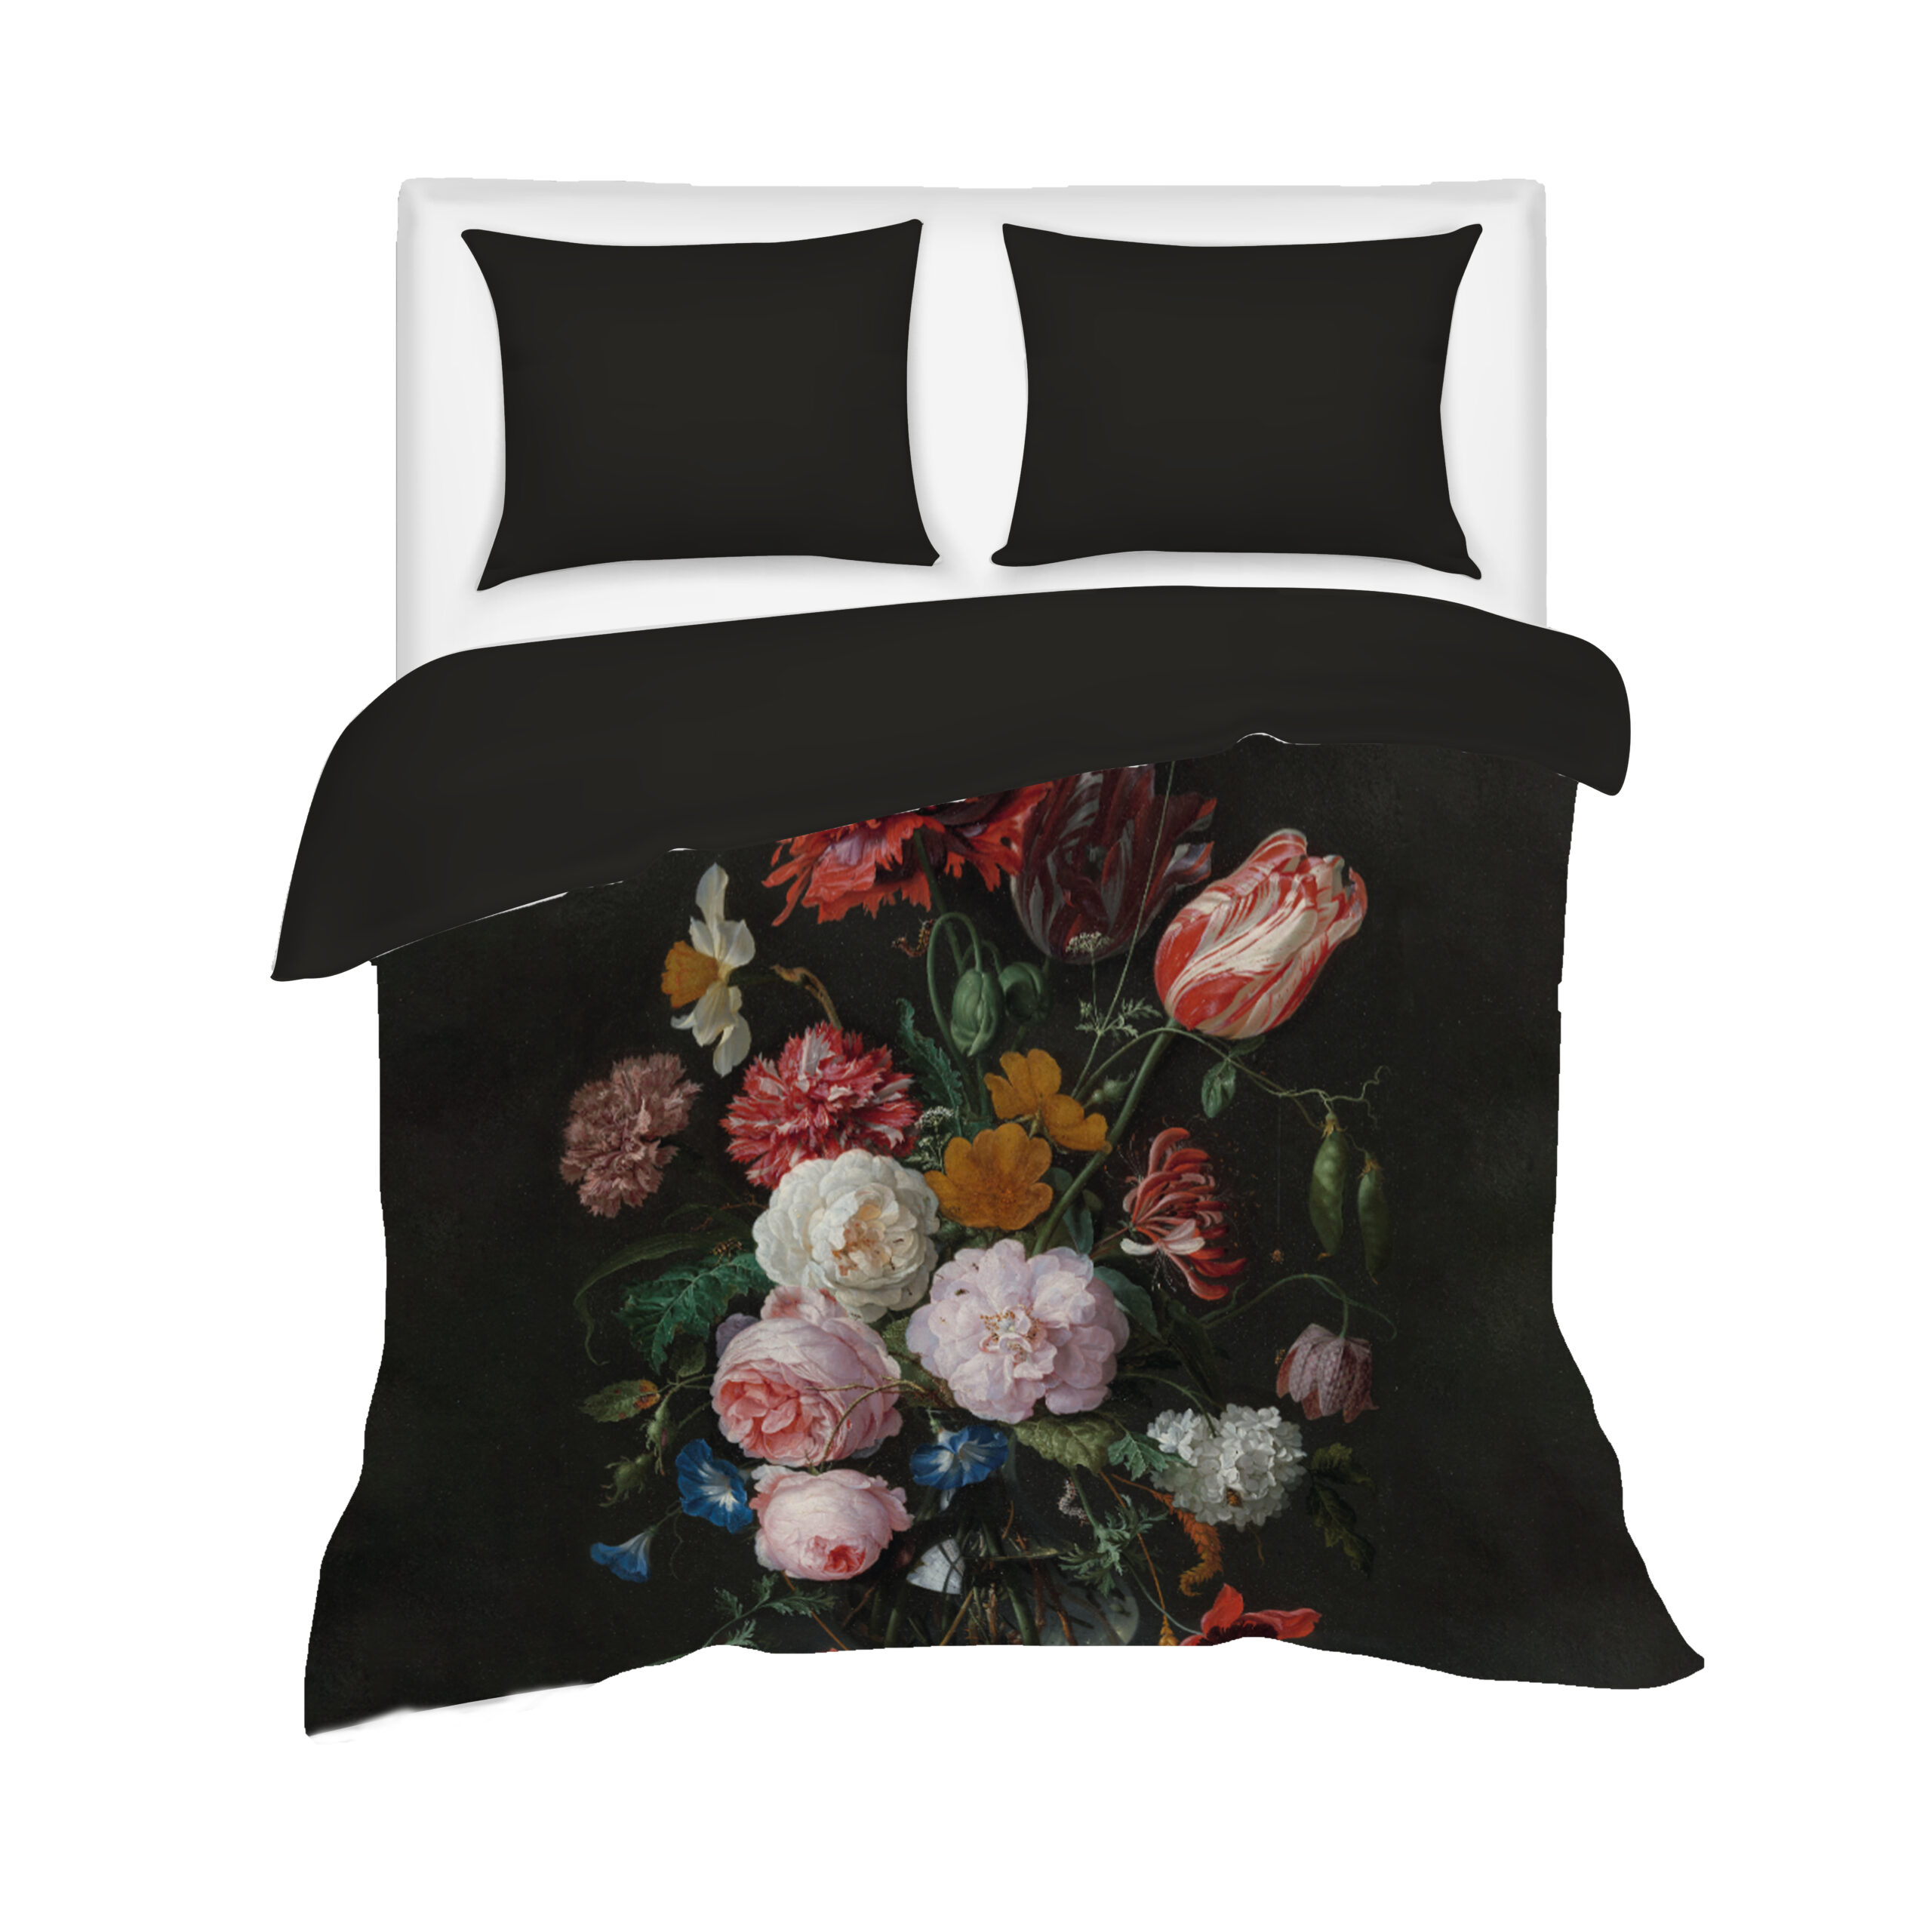 Villa Madelief 240 x 200cm Black Flowers Printed Twin Beds Duvet Cover with 2 Pillowcases